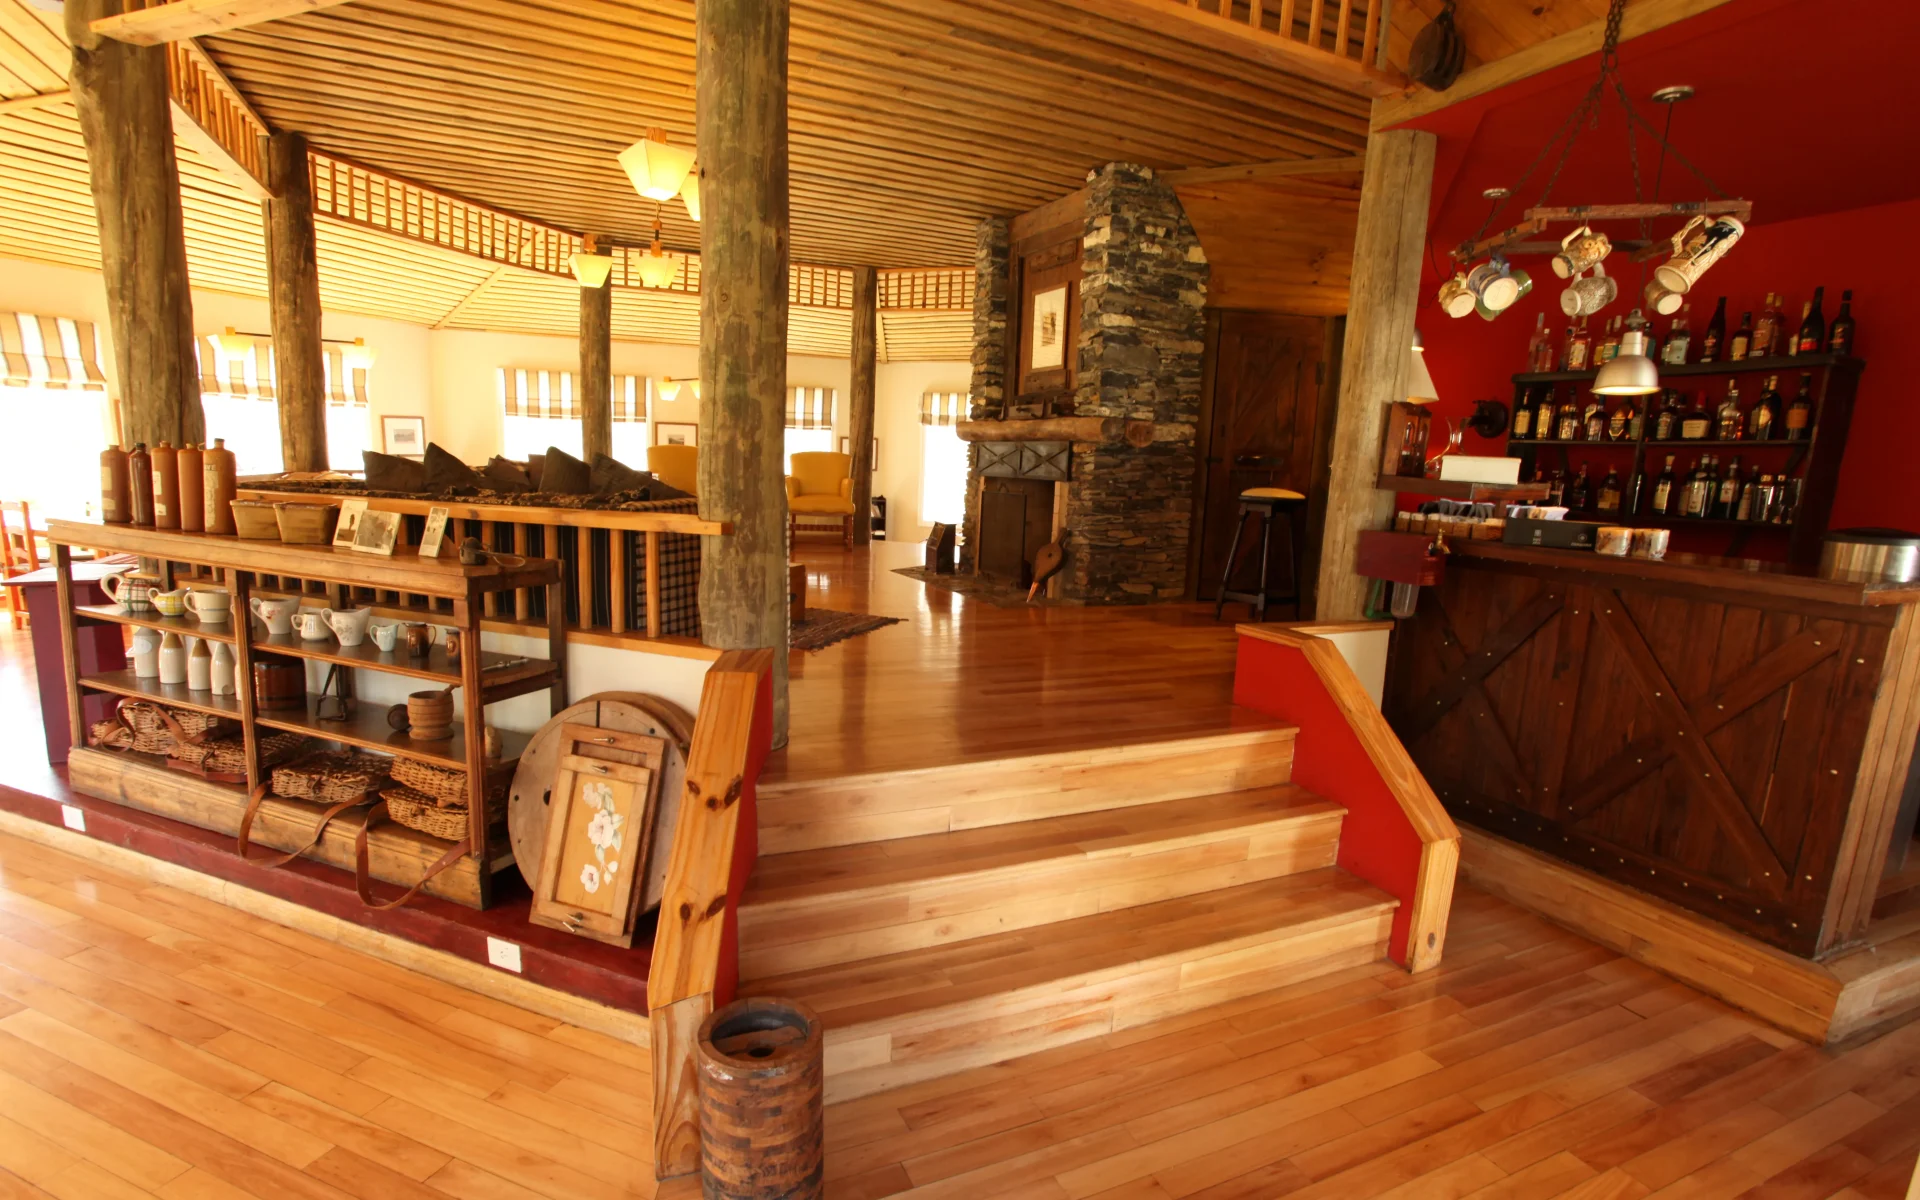 The interior of the main estancia is adorned in glossy wood panelling and there is a stone fireplace in the centre.